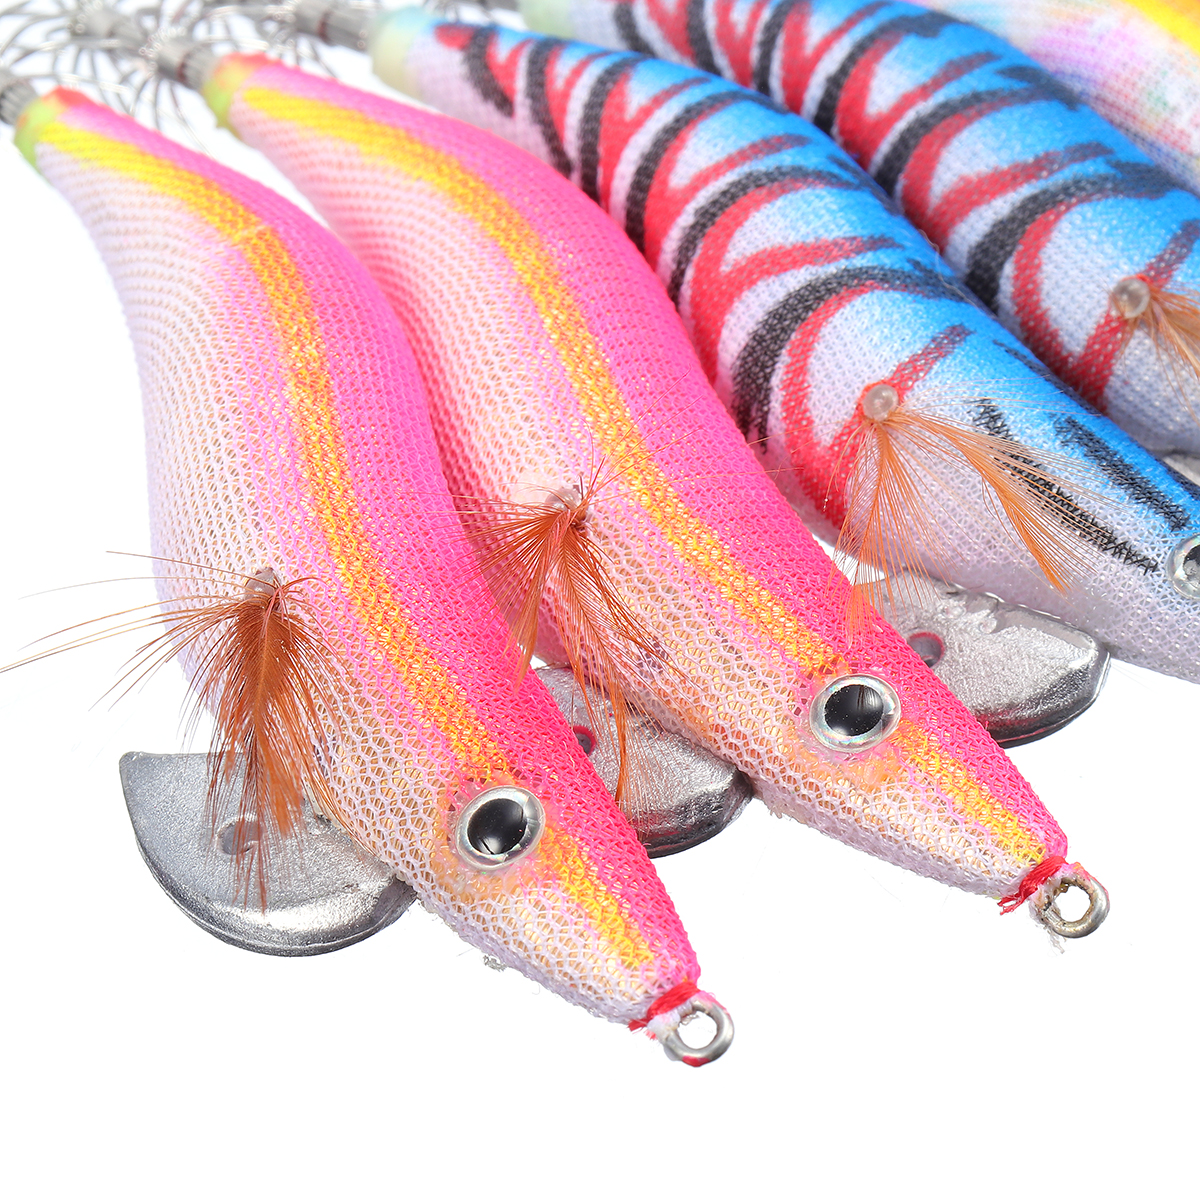 10PcsSet-Squid-Jigs-Clothed-Fishing-Lure-35-Fishing-Tackle-Colorful-Hook-With-Bag-1355049